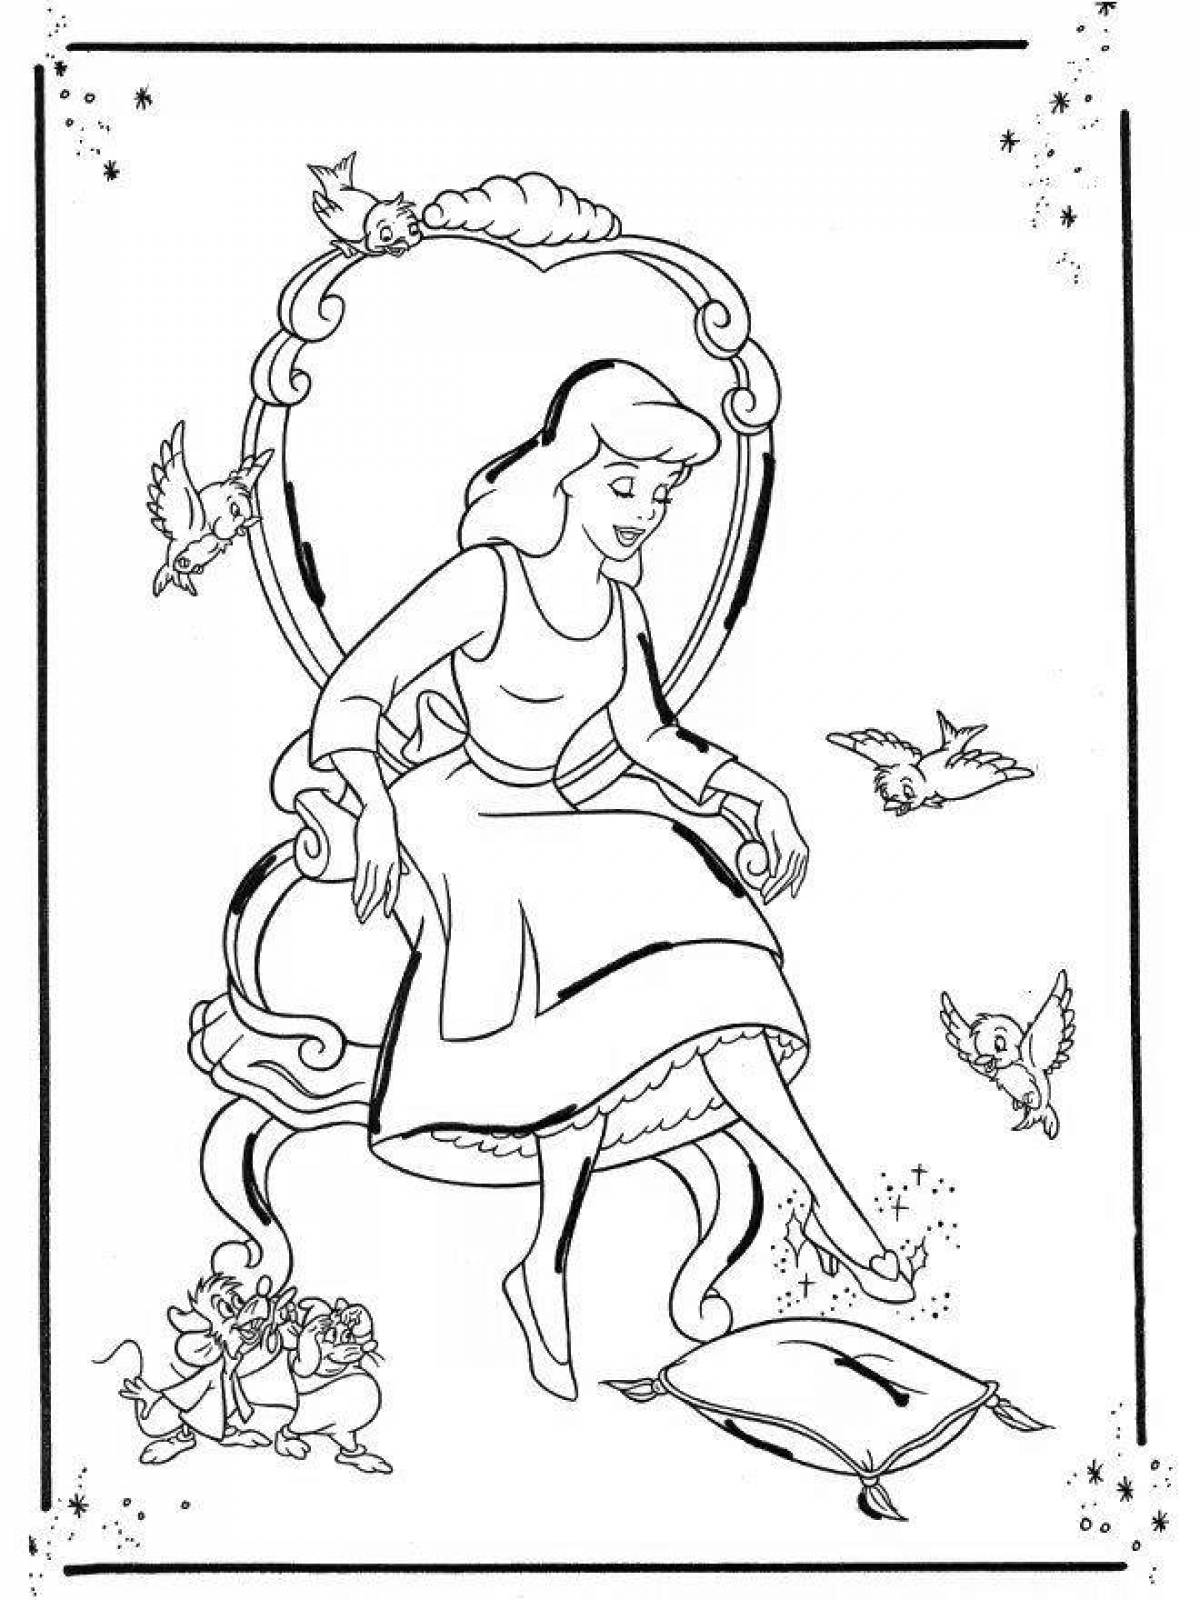 Fancy Cinderella and Charles Perrault coloring book